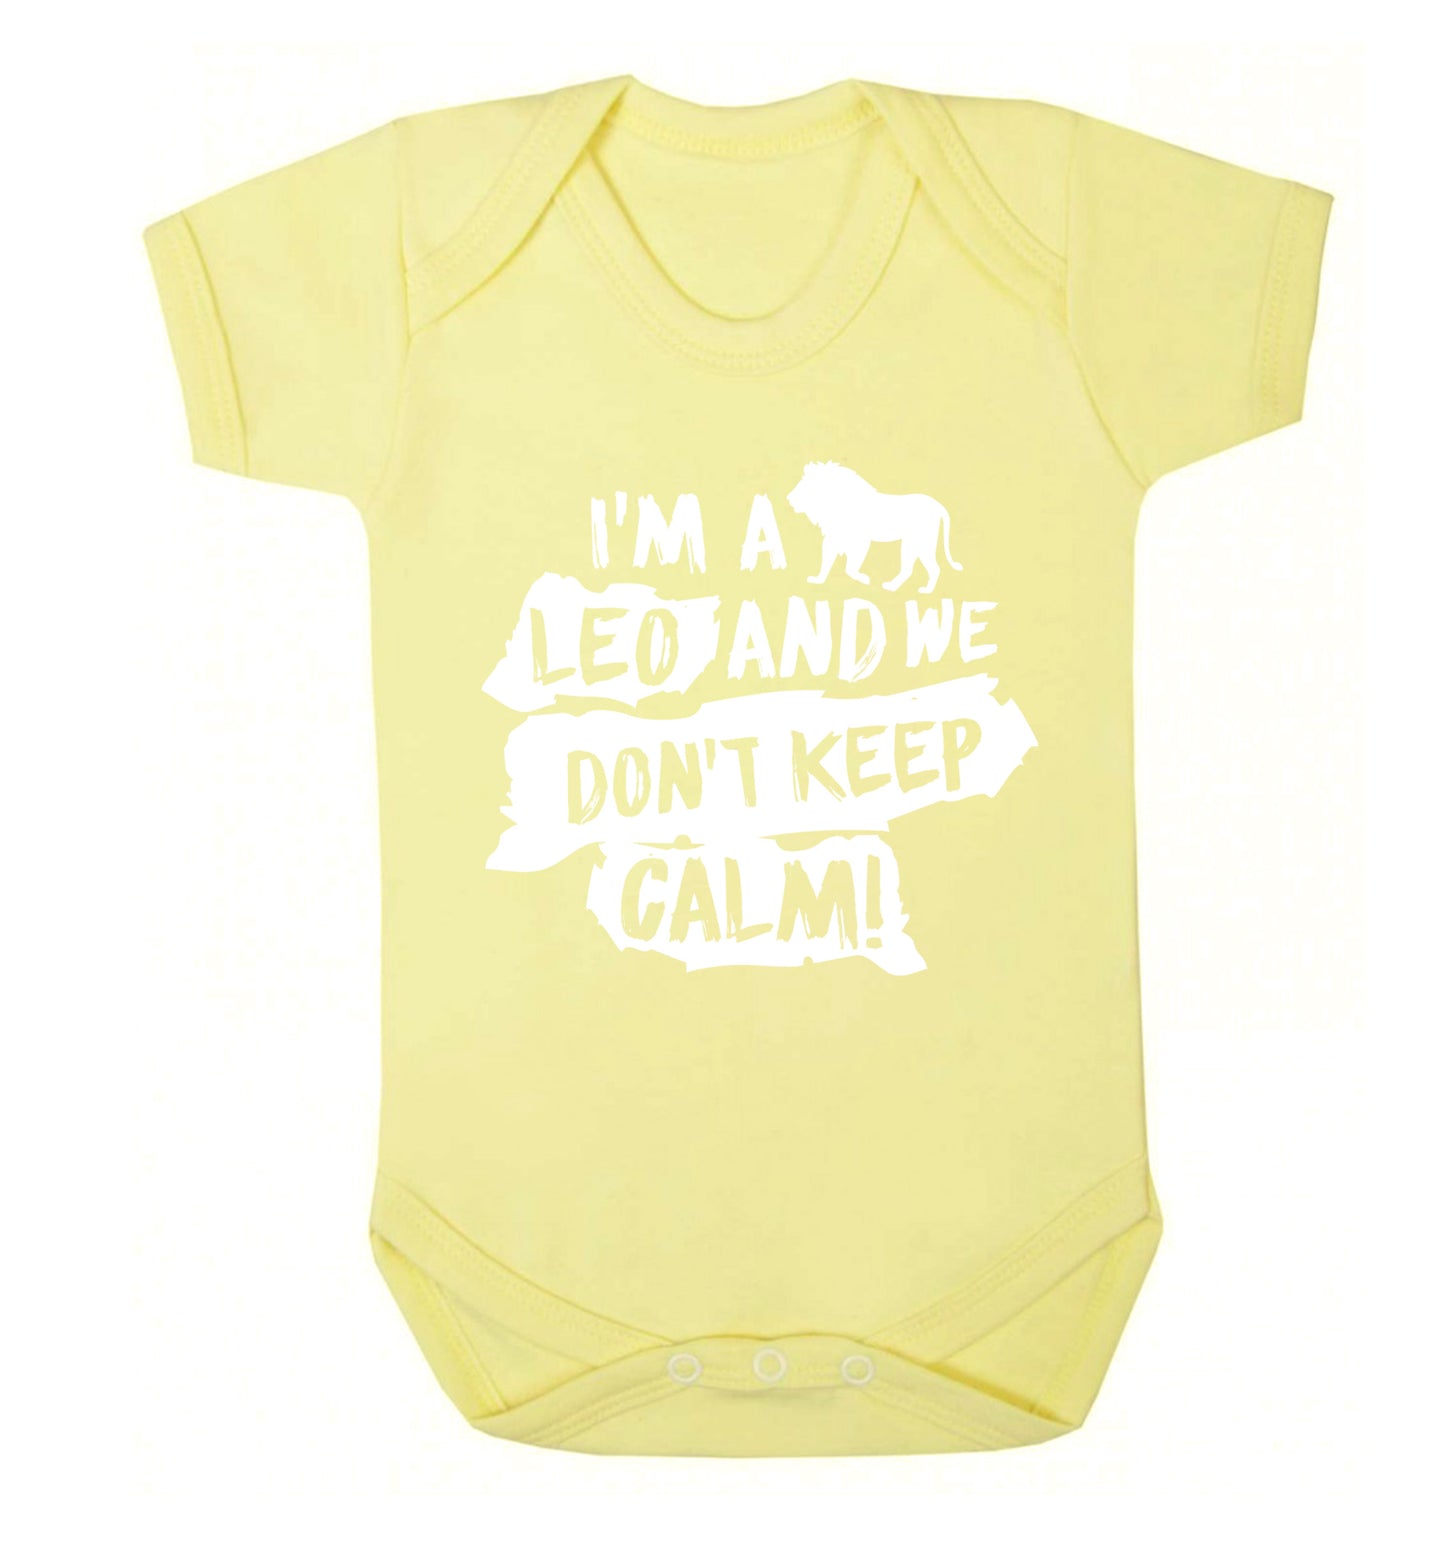 I'm a leo and we don't keep calm! Baby Vest pale yellow 18-24 months